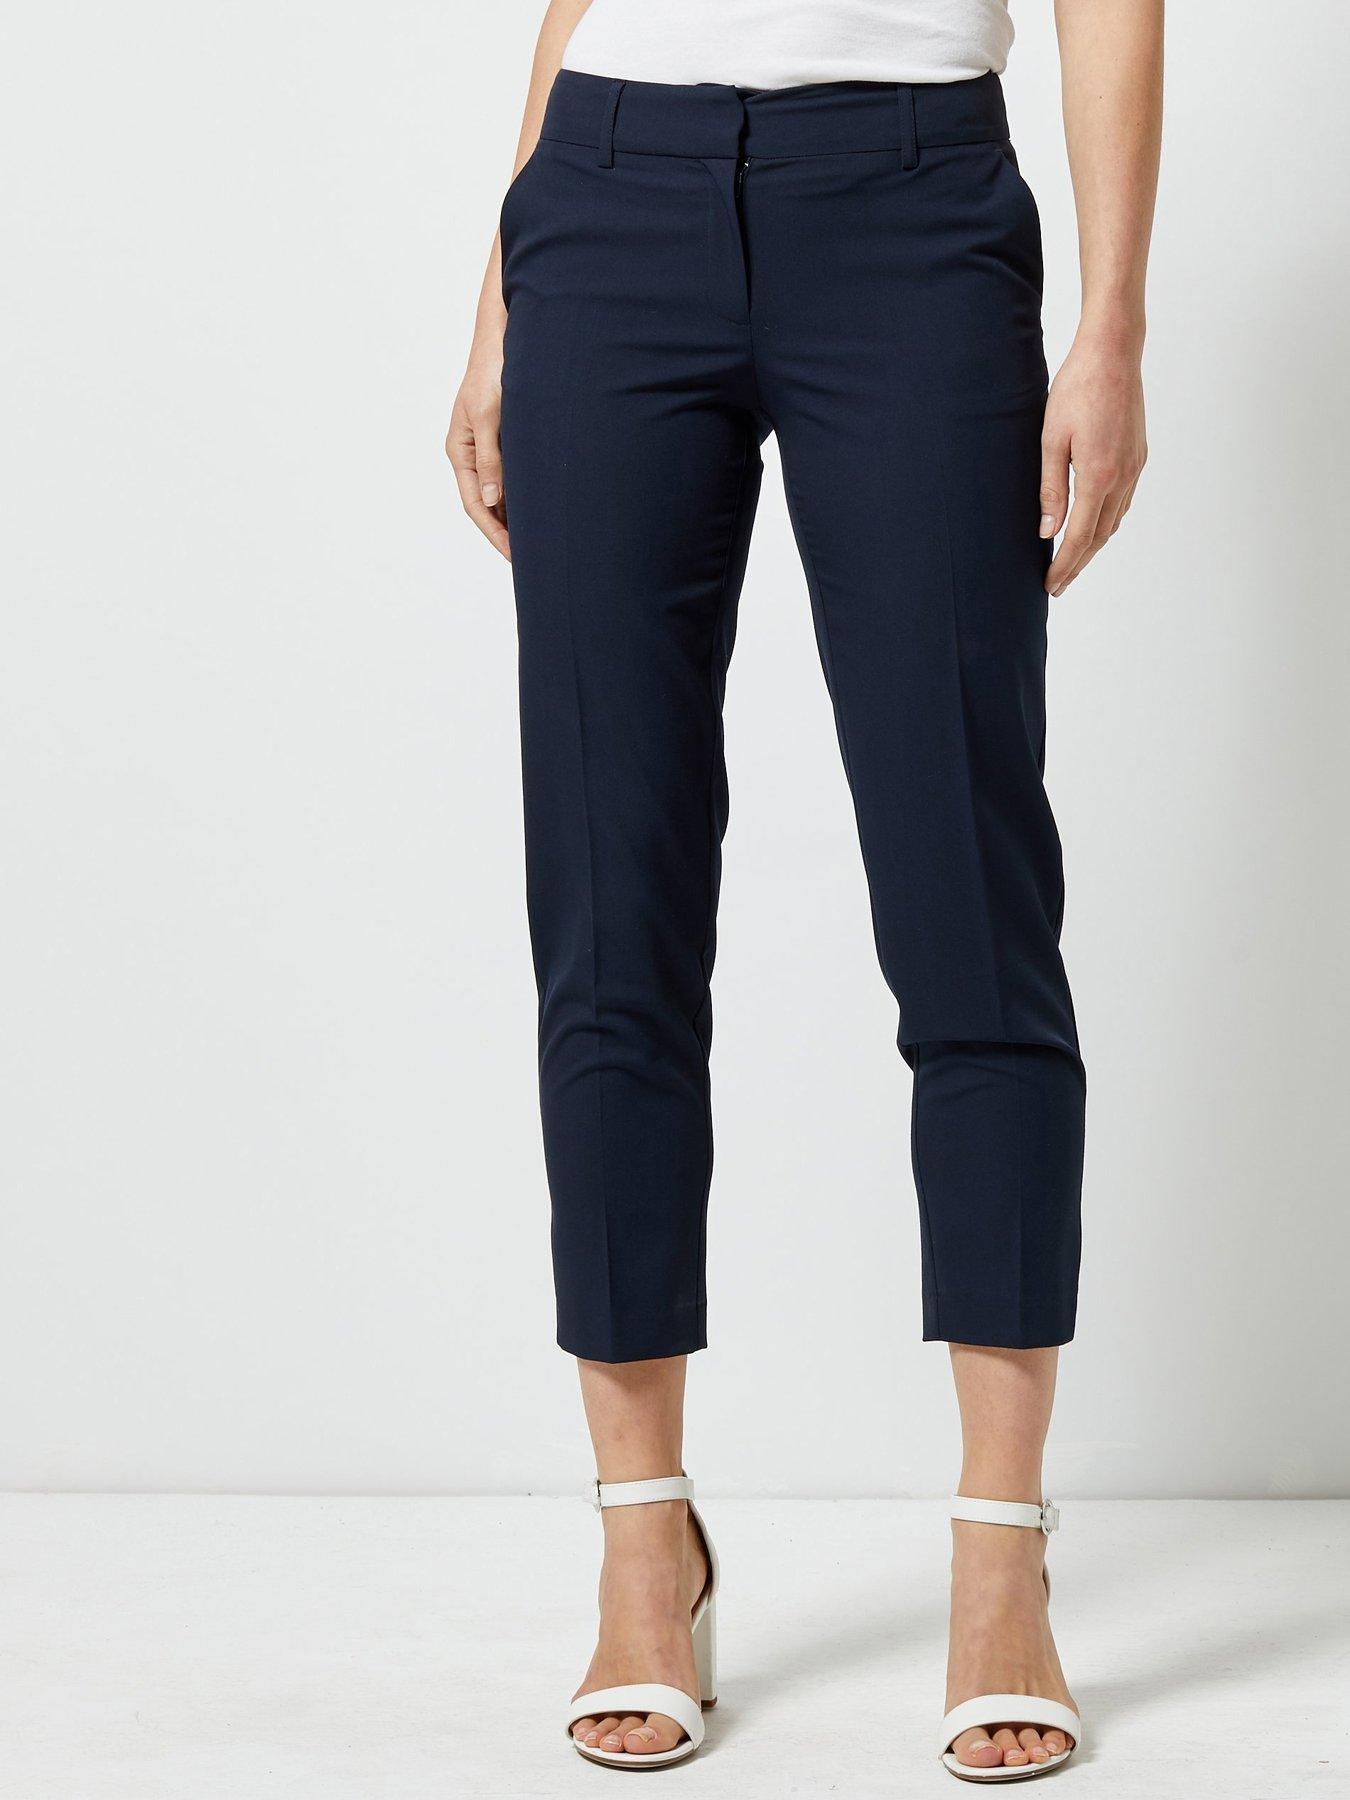 Dorothy Perkins Ankle Grazer Trousers - Navy | very.co.uk